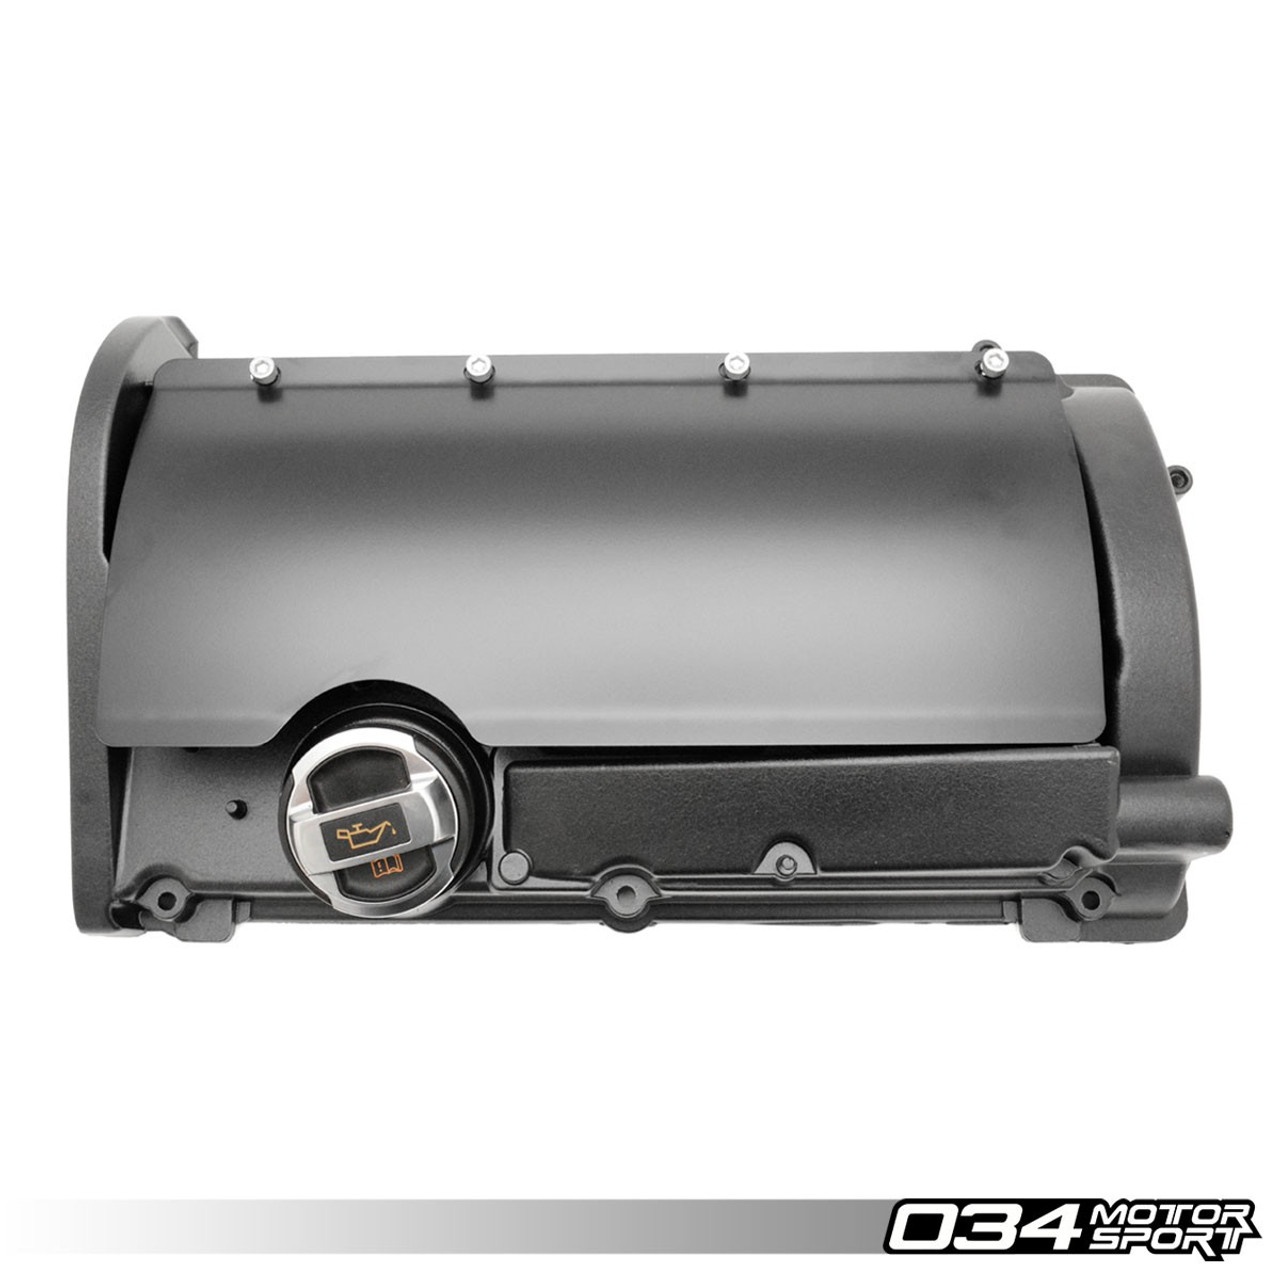 034Motorsport Stainless Steel Coil Cover for 1.8T